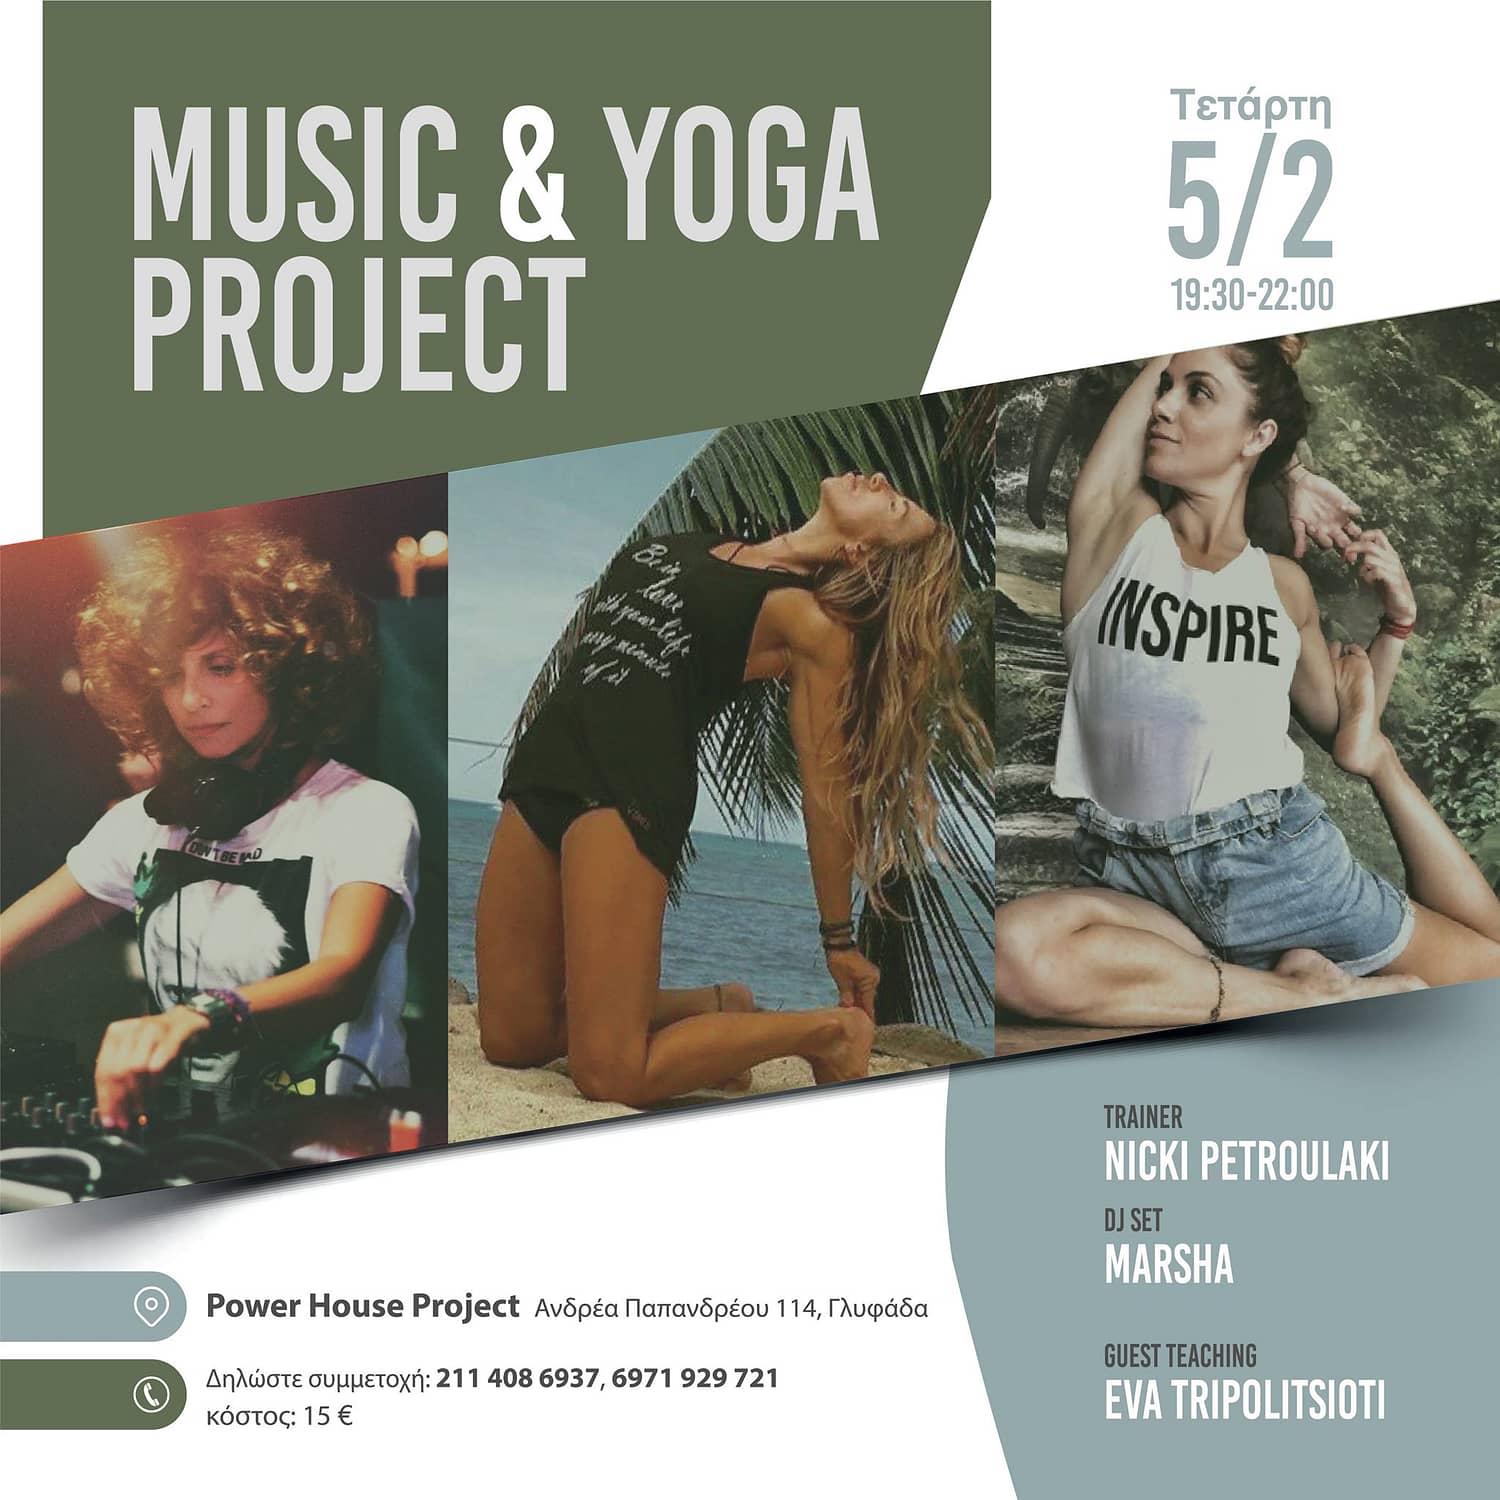 Music & Yoga Project at Power House